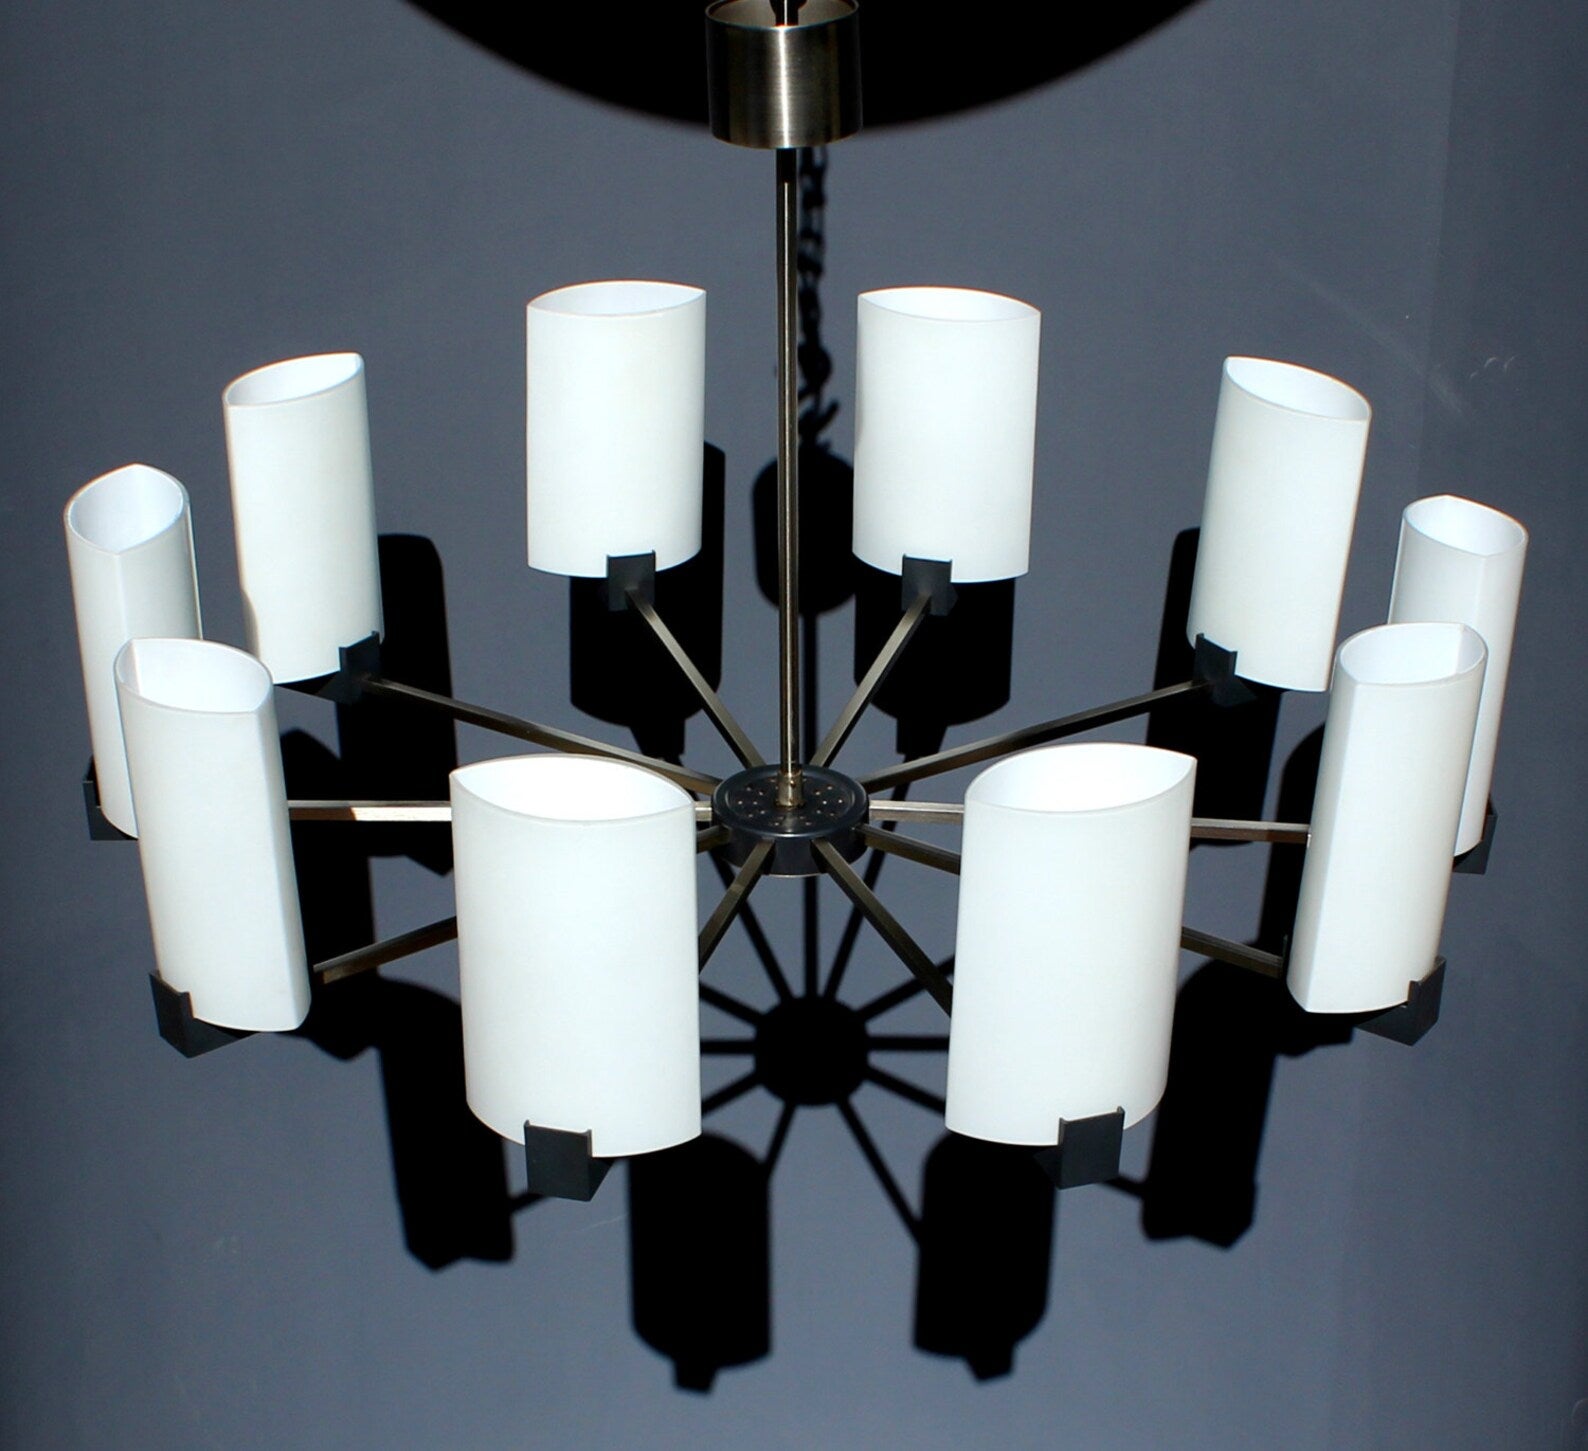 NICKEL PLATED MODERNIST CHANDELIER 1970s WITH 10 OPAL GLASS TUBES BY KAISER GERMANY (E14) 
DIAMETER 28,5